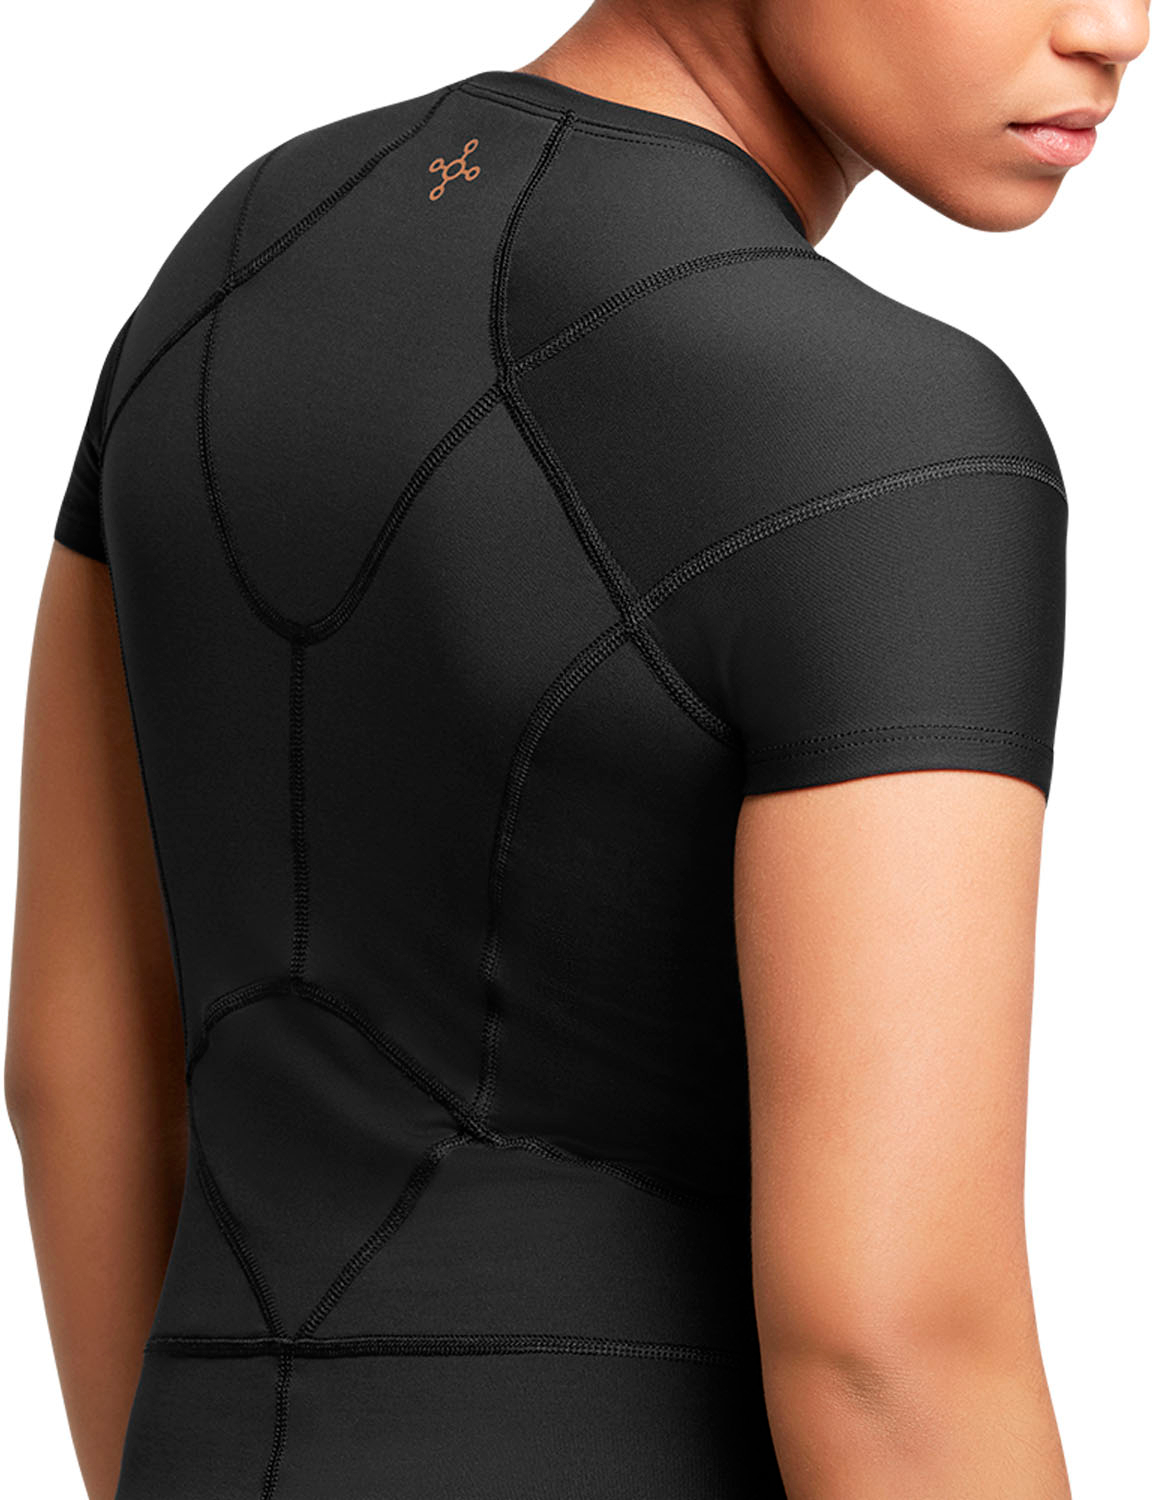 Tommie Copper Womens Full Zip Compression Shirt w/ Back Support